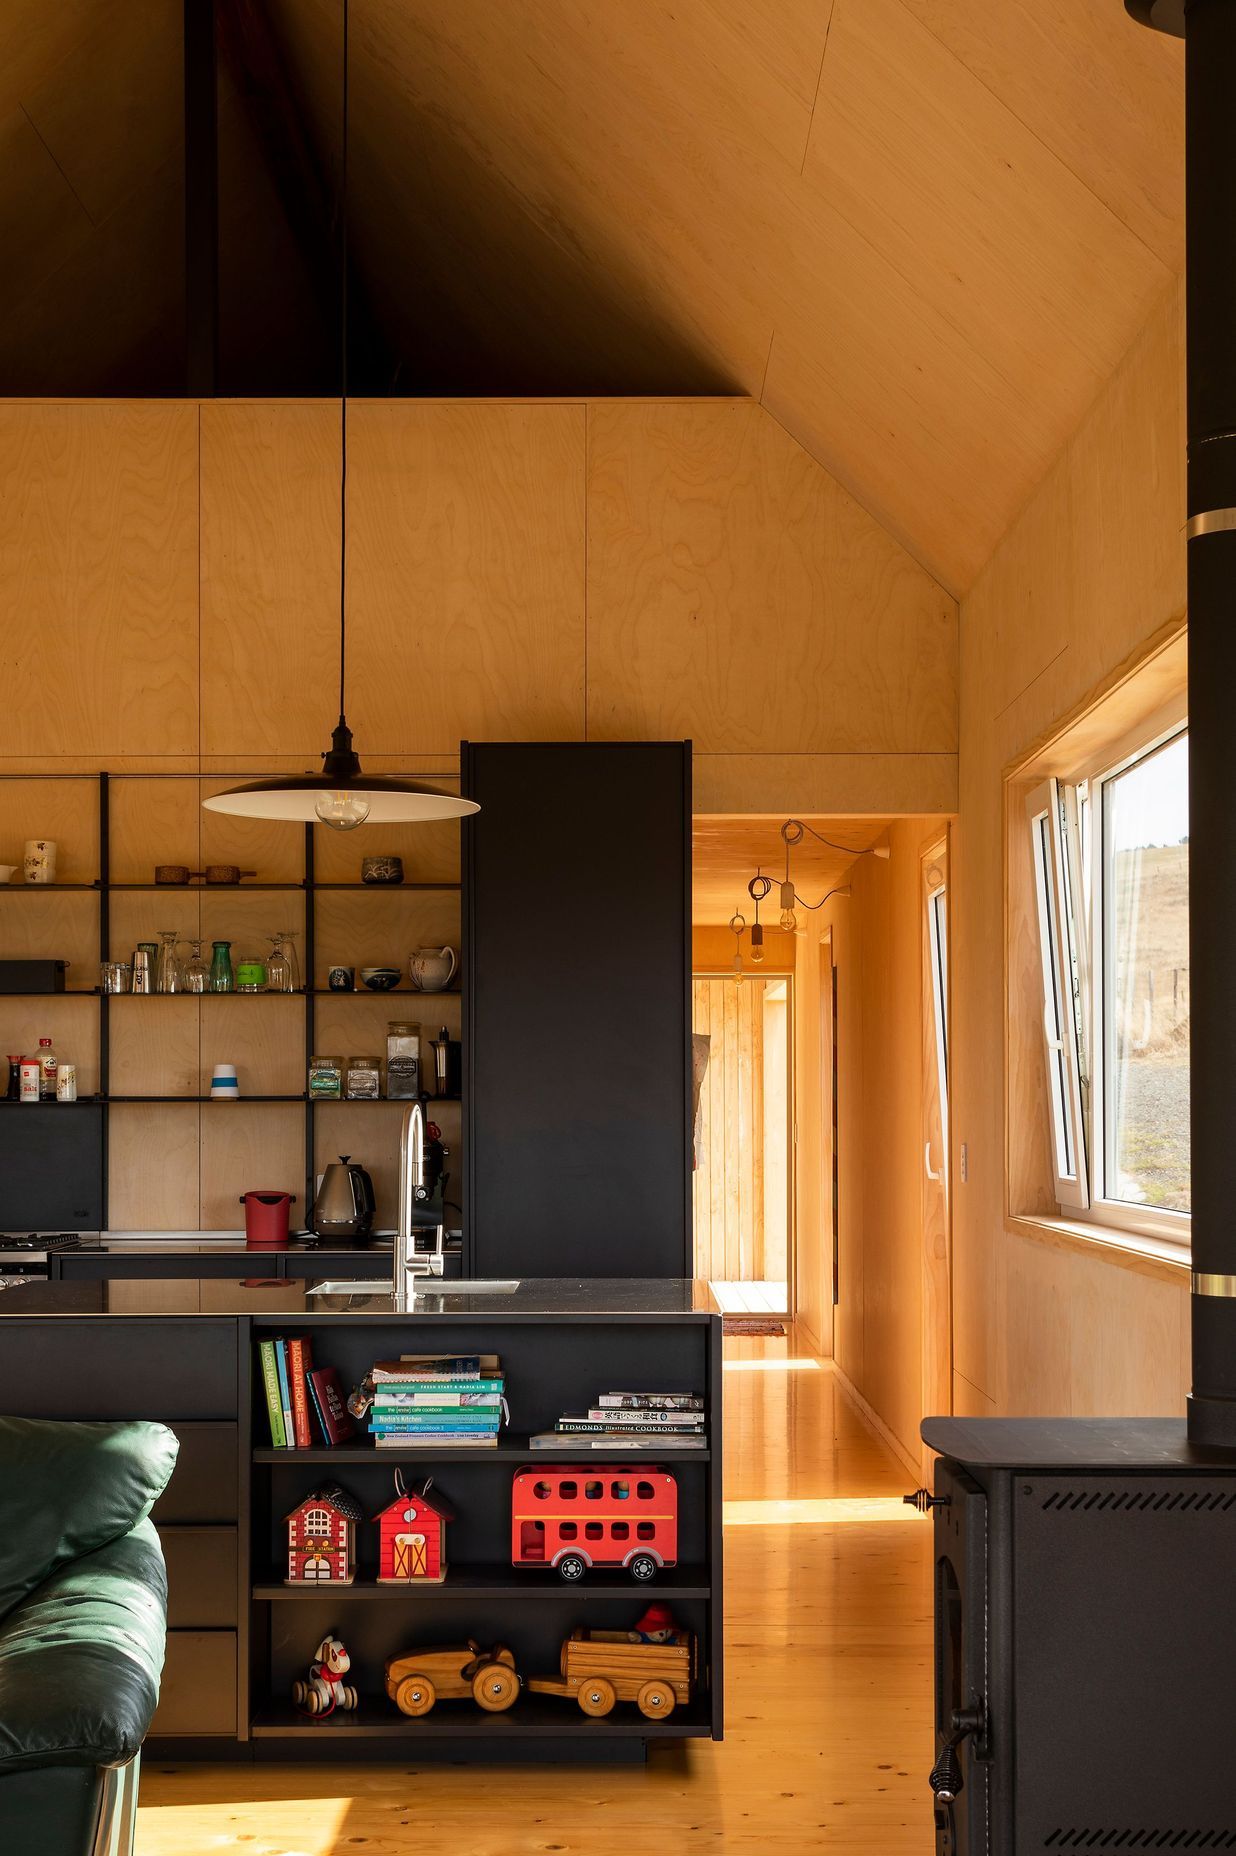 An all-black kitchen provides a strong contrast against the light timbers.